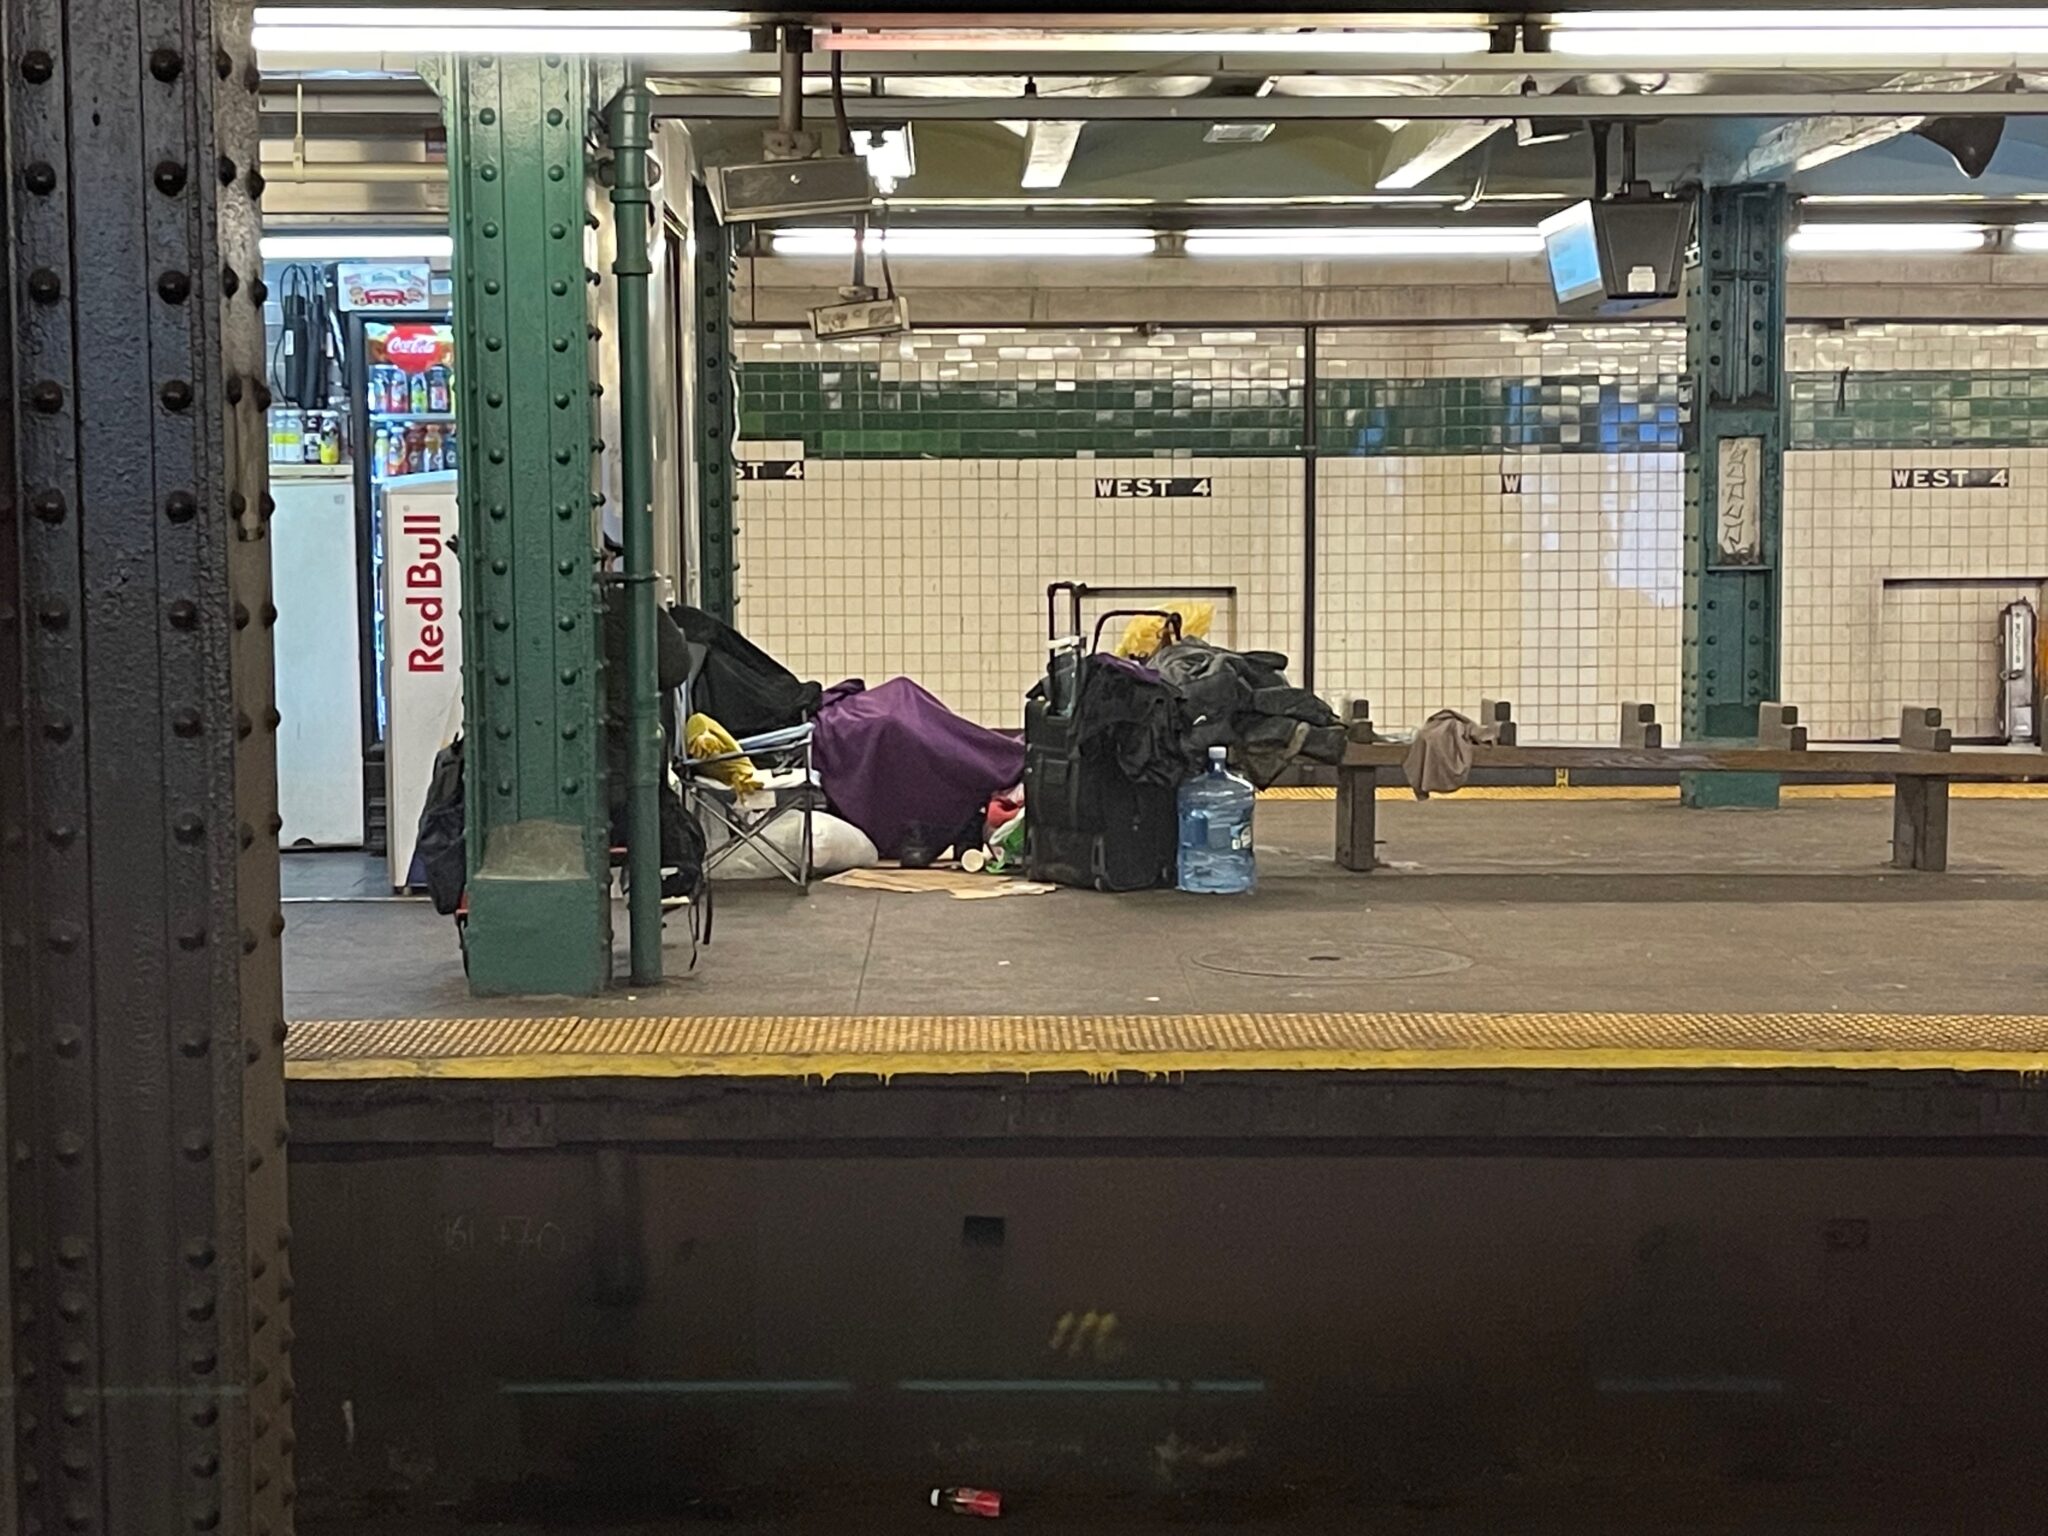 Homeless Person Camped out in the subway. Photo by ConsumerMojo.com